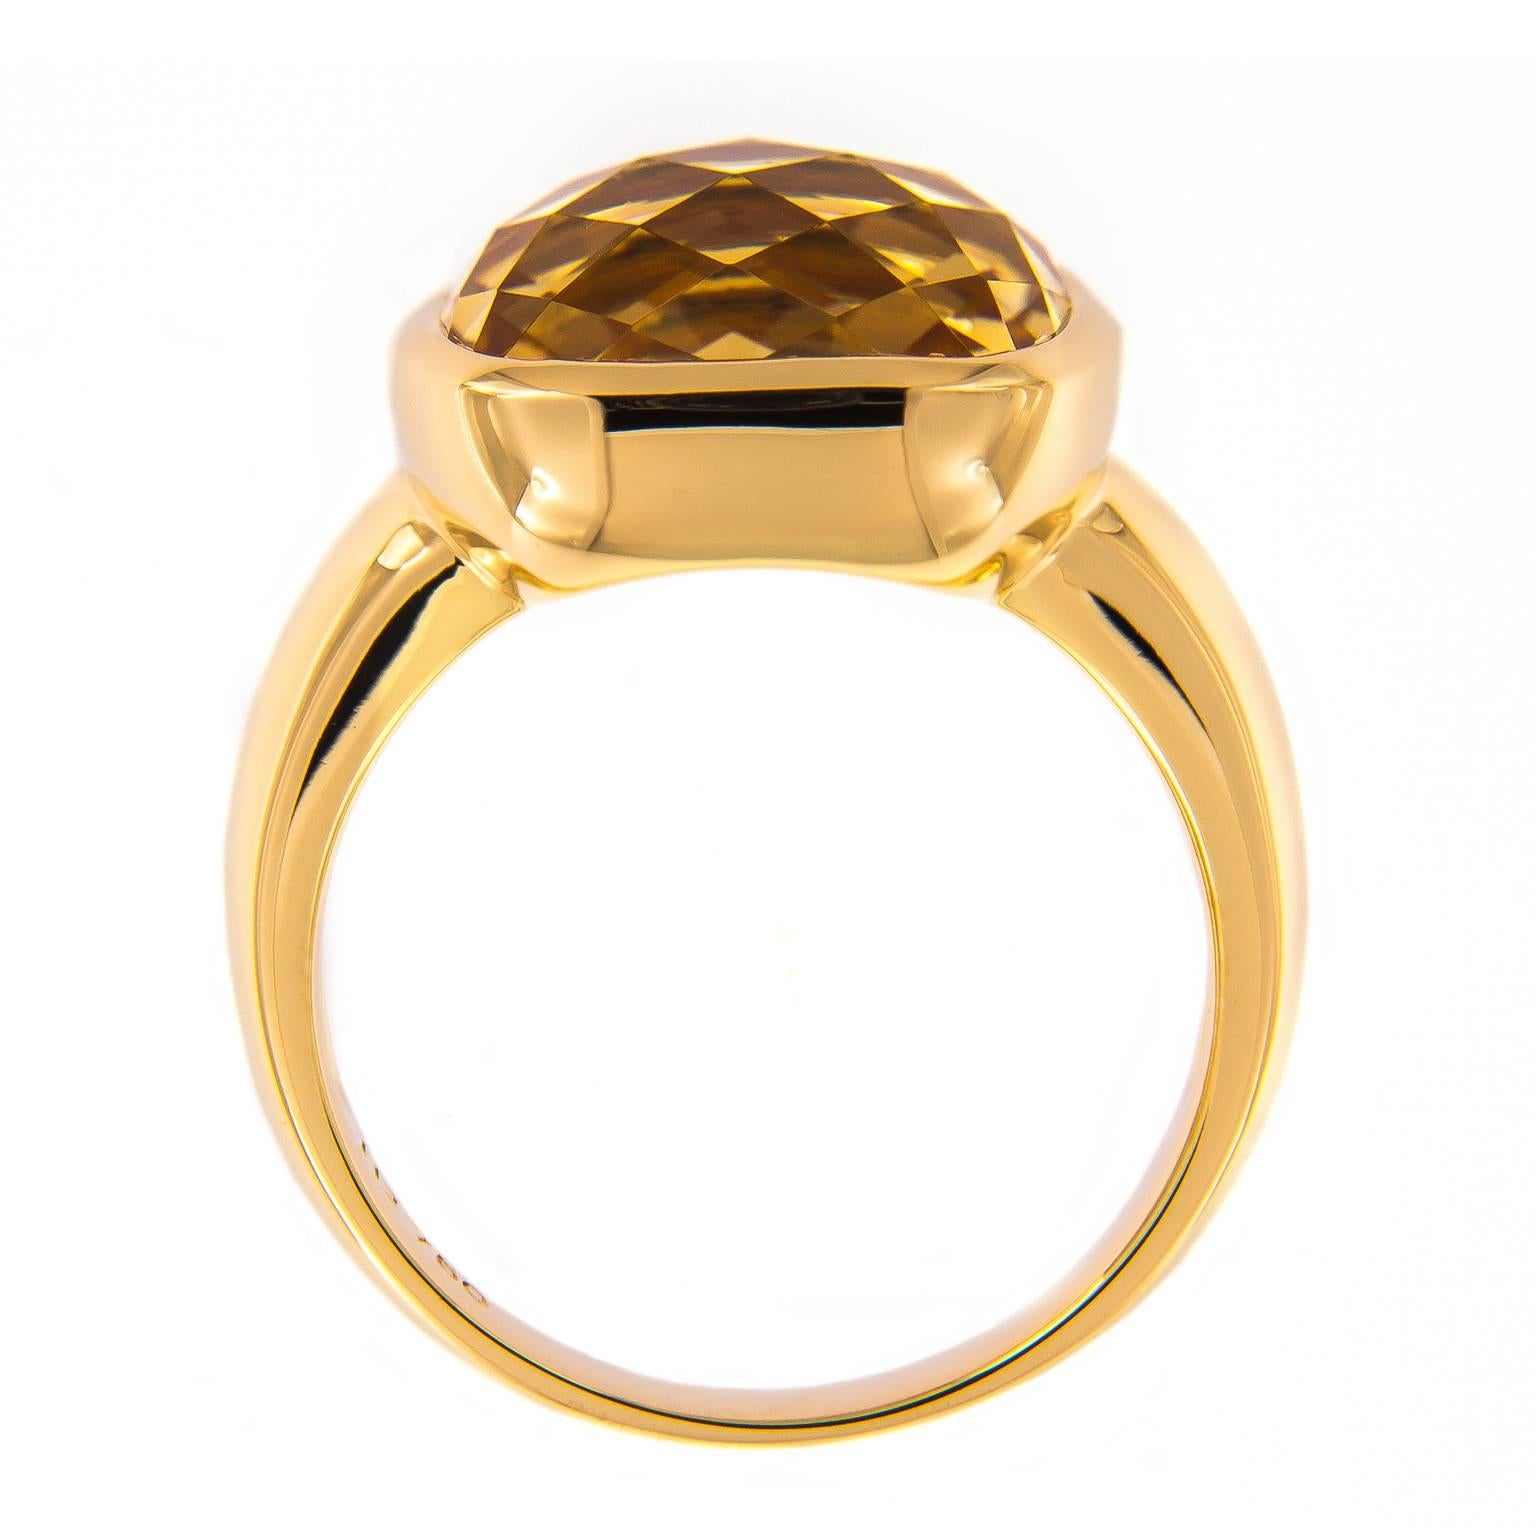 Make a statement with sunny yellow hues with this fashion ring from the H2 Collection by Hammerman of New York. This beautiful checkerboard cushion cut citrine is x set in 18k yellow gold.

Ring Size 6.25
Citrine 7.85 carat.